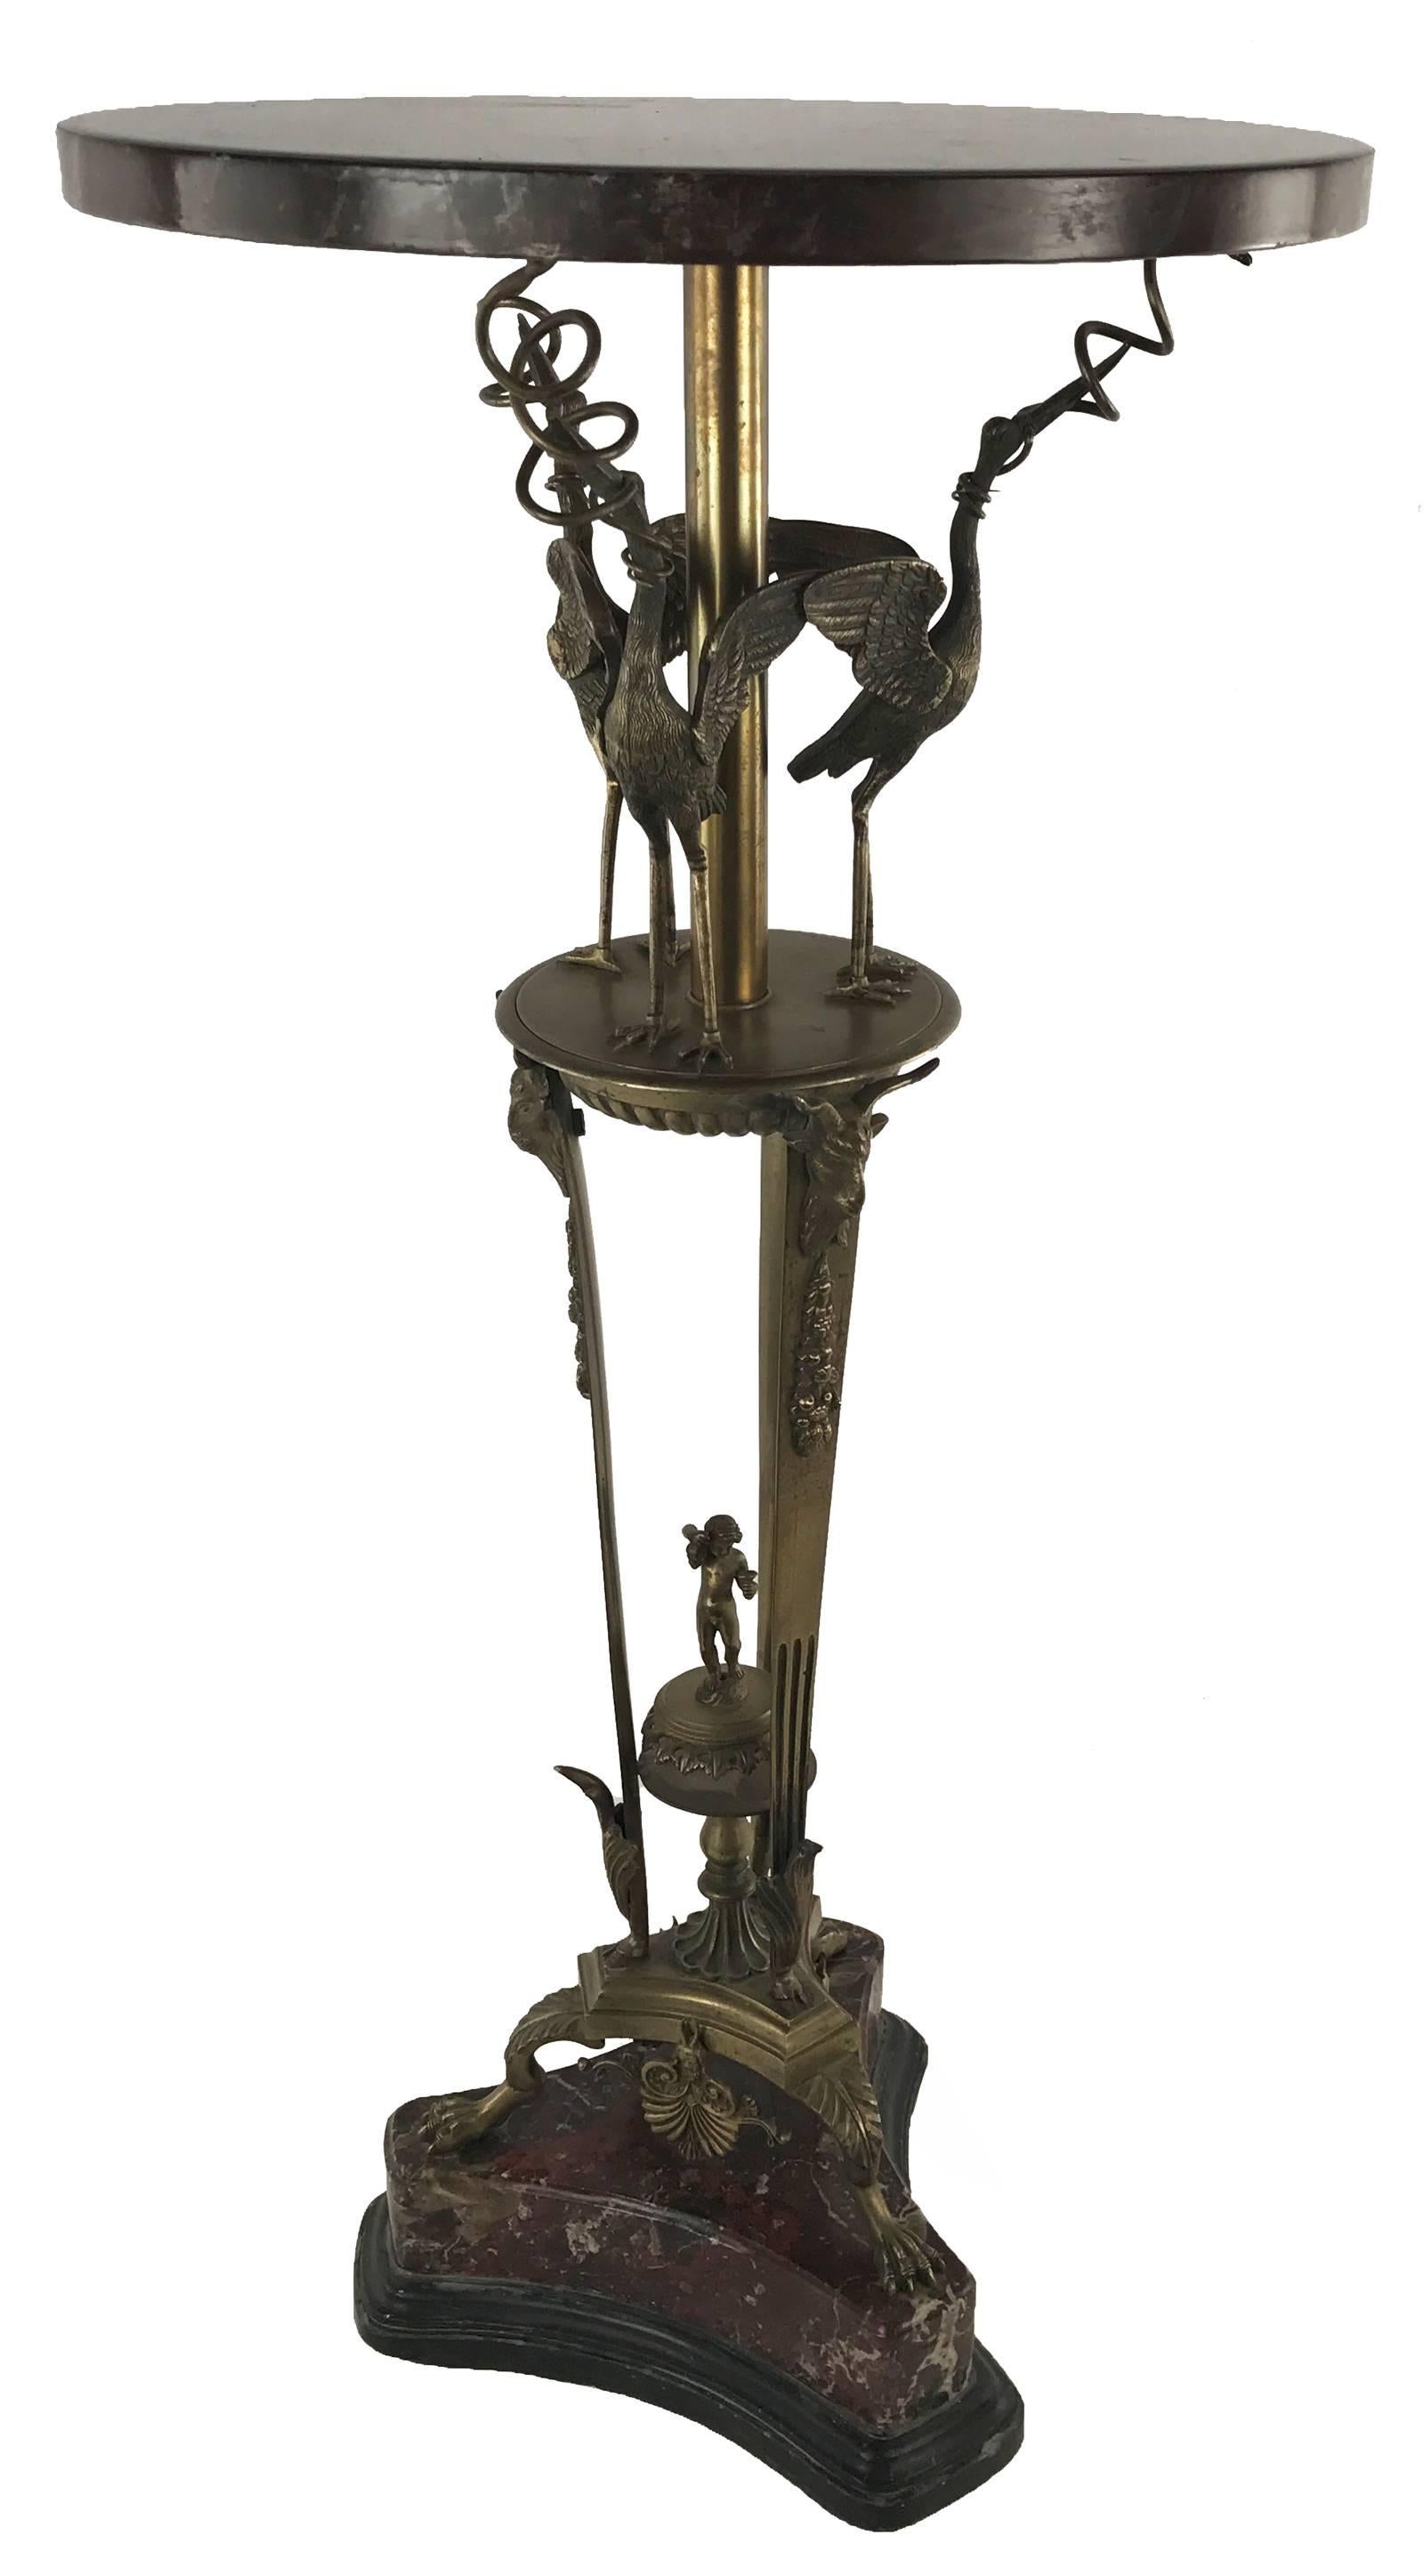 An Empire style pedestal table with an acrylic, red faux-marble top that surmounts a bronze stem and round base on which are three standing cranes with spirals that support the tabletop. Three bronze legs with applied bacchus and garland motifs are